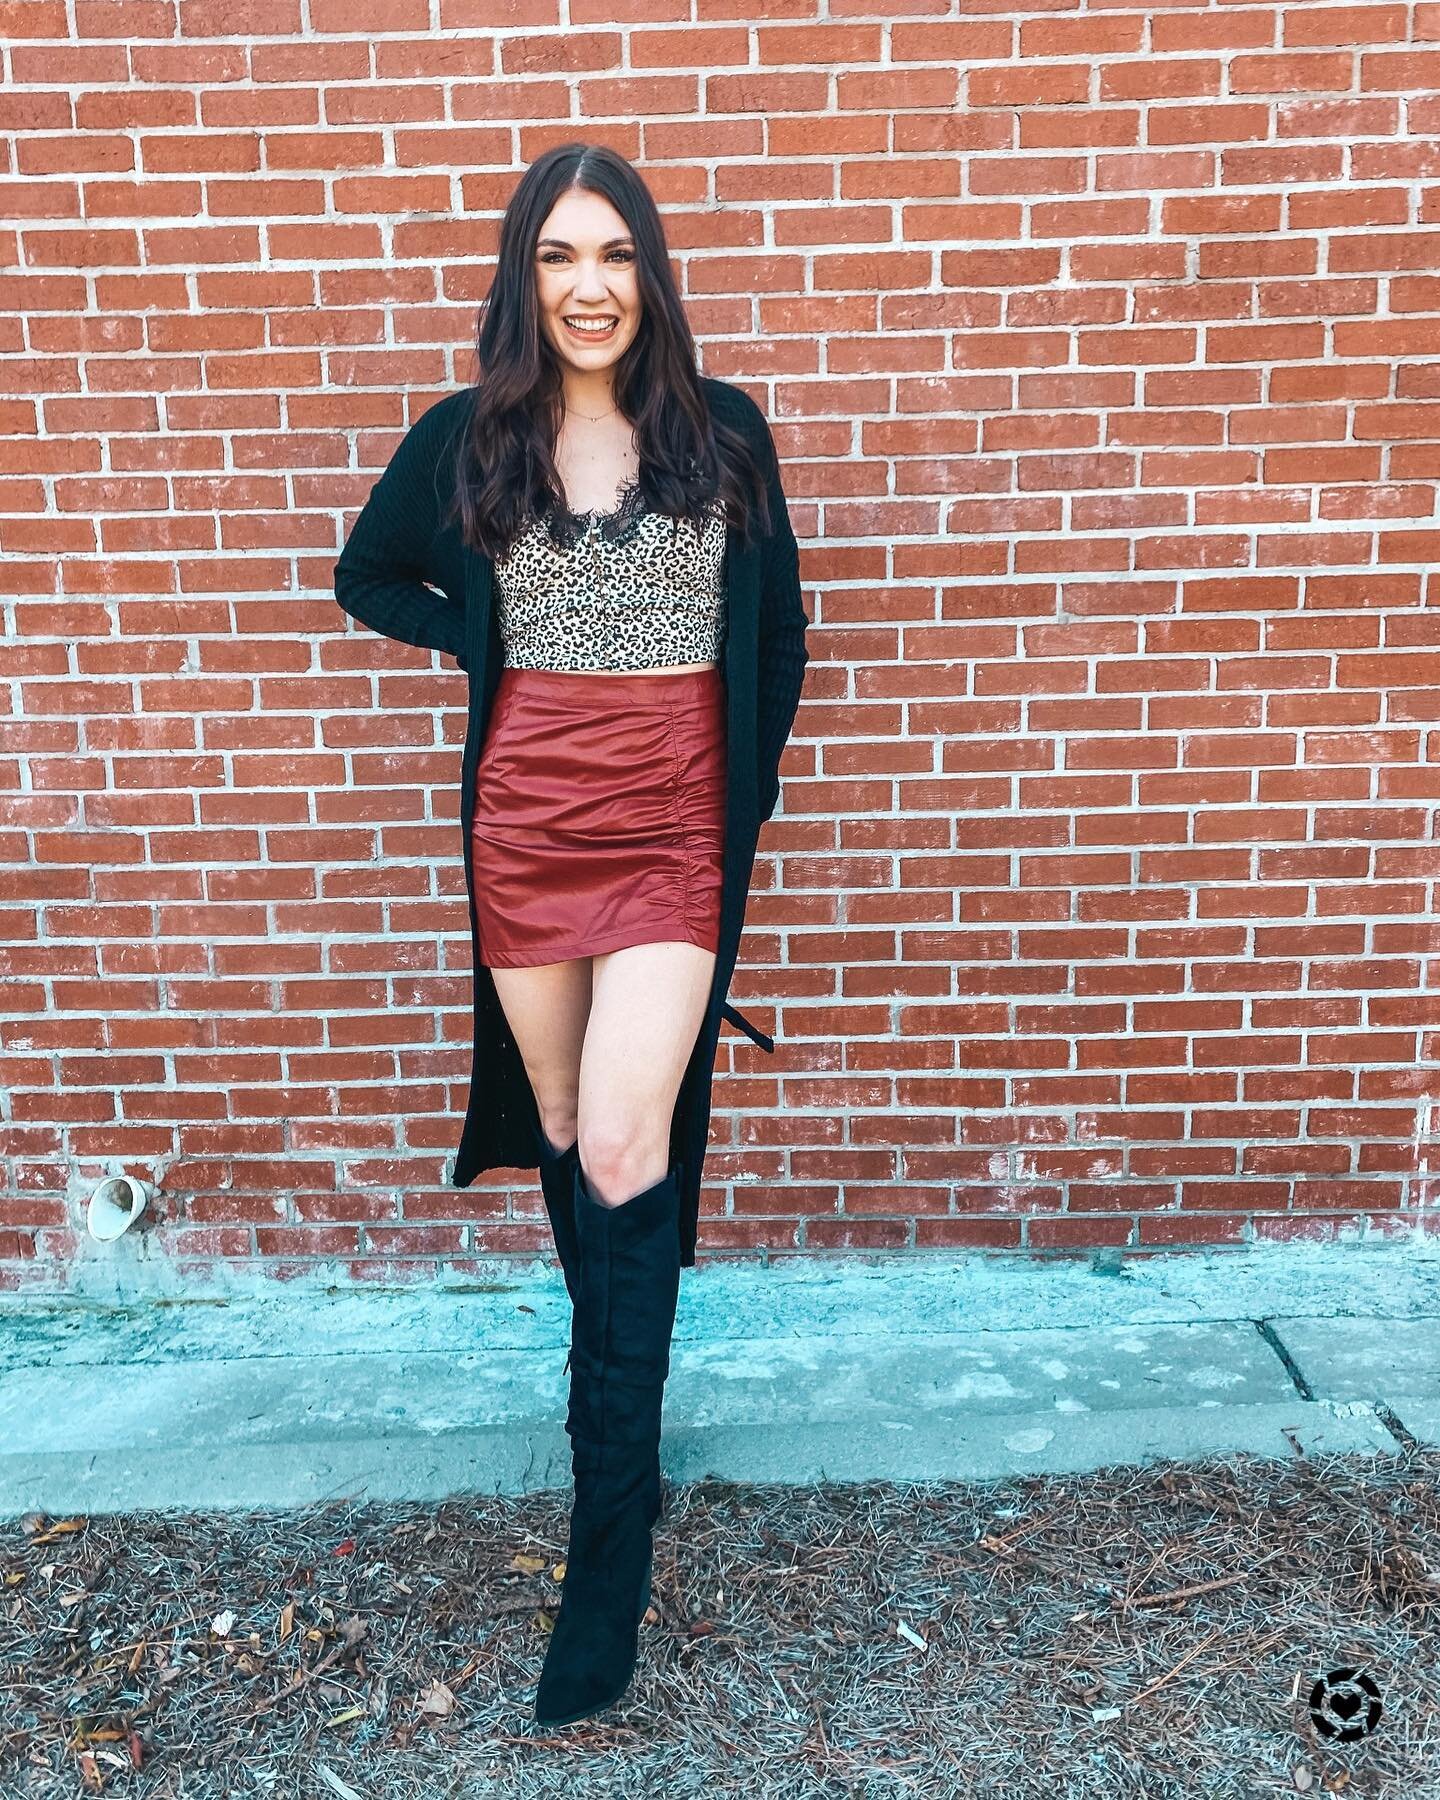 I truly had the best weekend and we barely did anything. Prepping for next week. Tomorrow is a new week, a new MONTH! What goals are we crushing in Feb?! How was your first month of 2021? 🖤🤍 

PS- this outfit is from my fav local boutique @nativeco